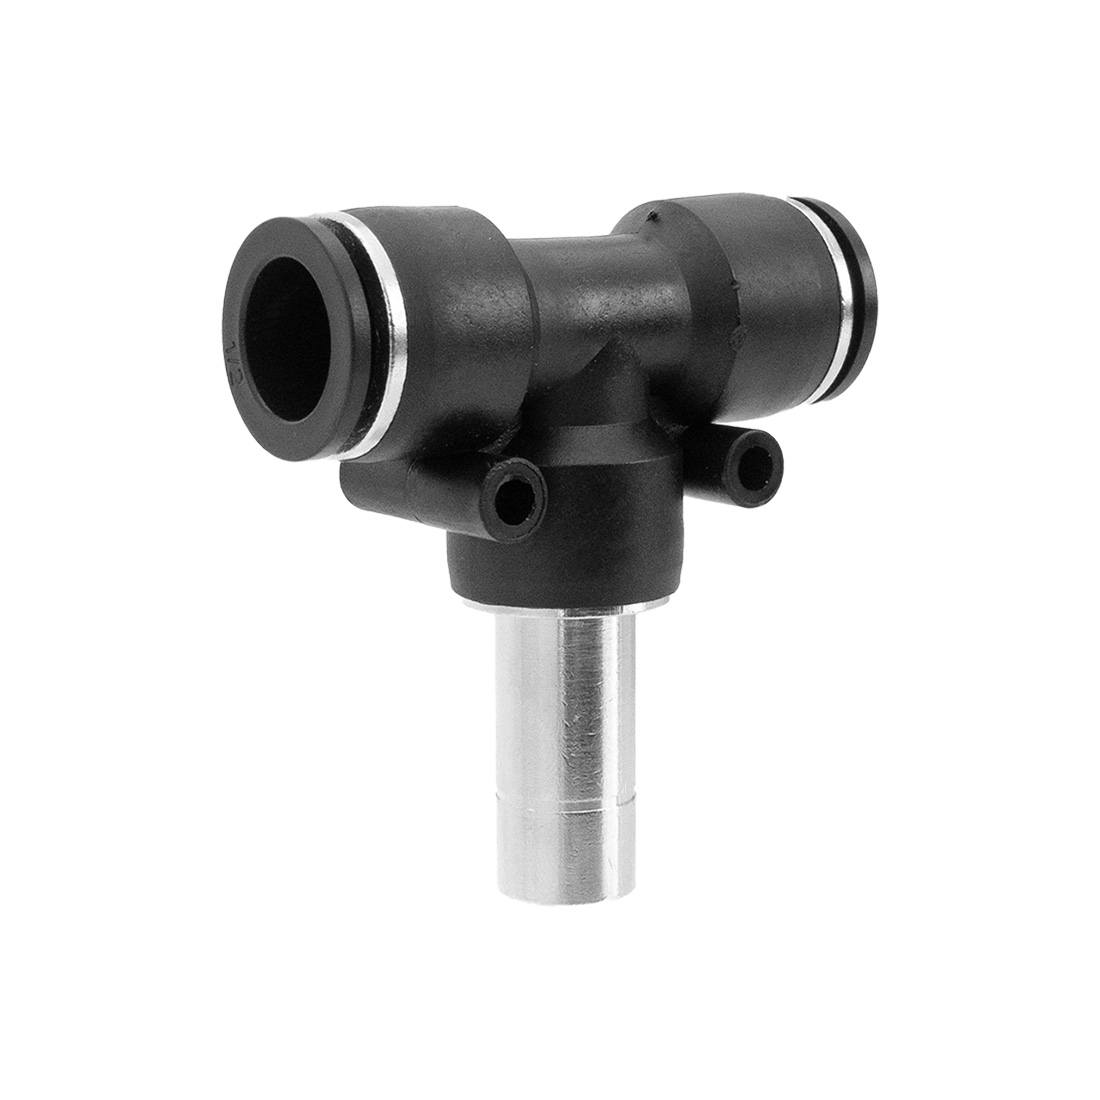 XERO Push-to-Fit T-Fitting with Stem - 1/2 Inch Side View